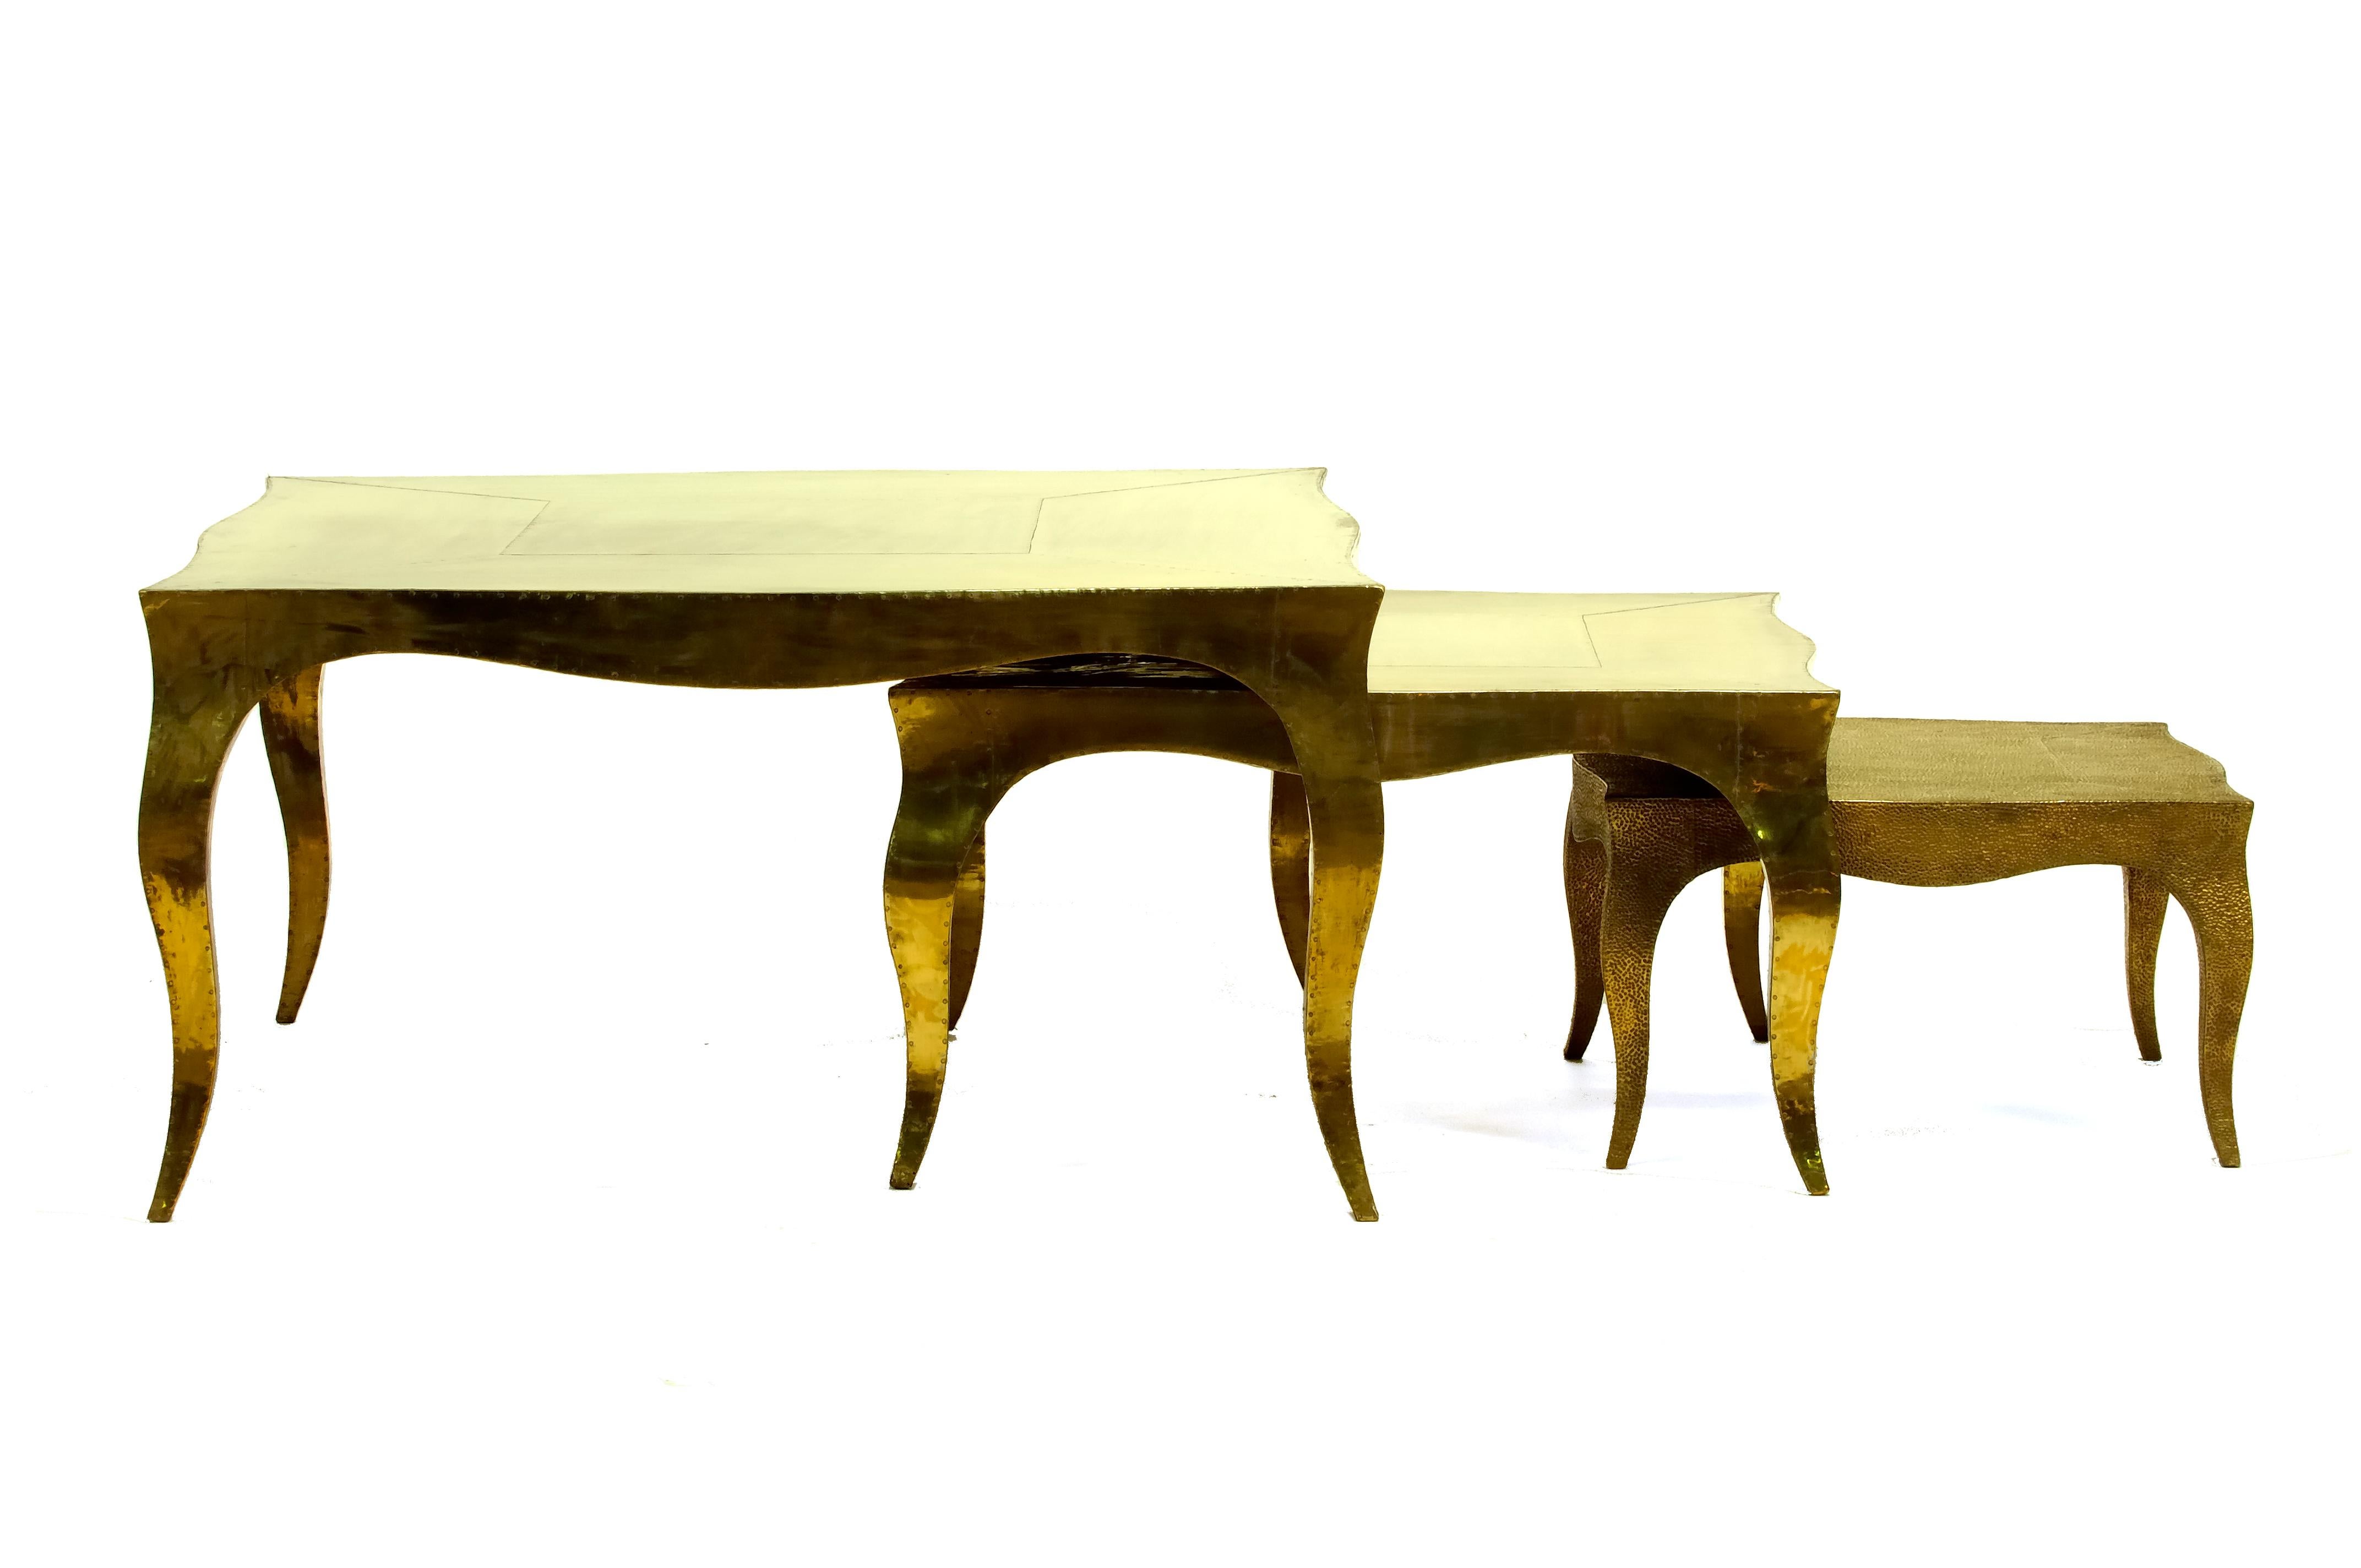 Louise Art Deco Industrial and Work Tables Mid. Hammered Copper by Paul Mathieu For Sale 4